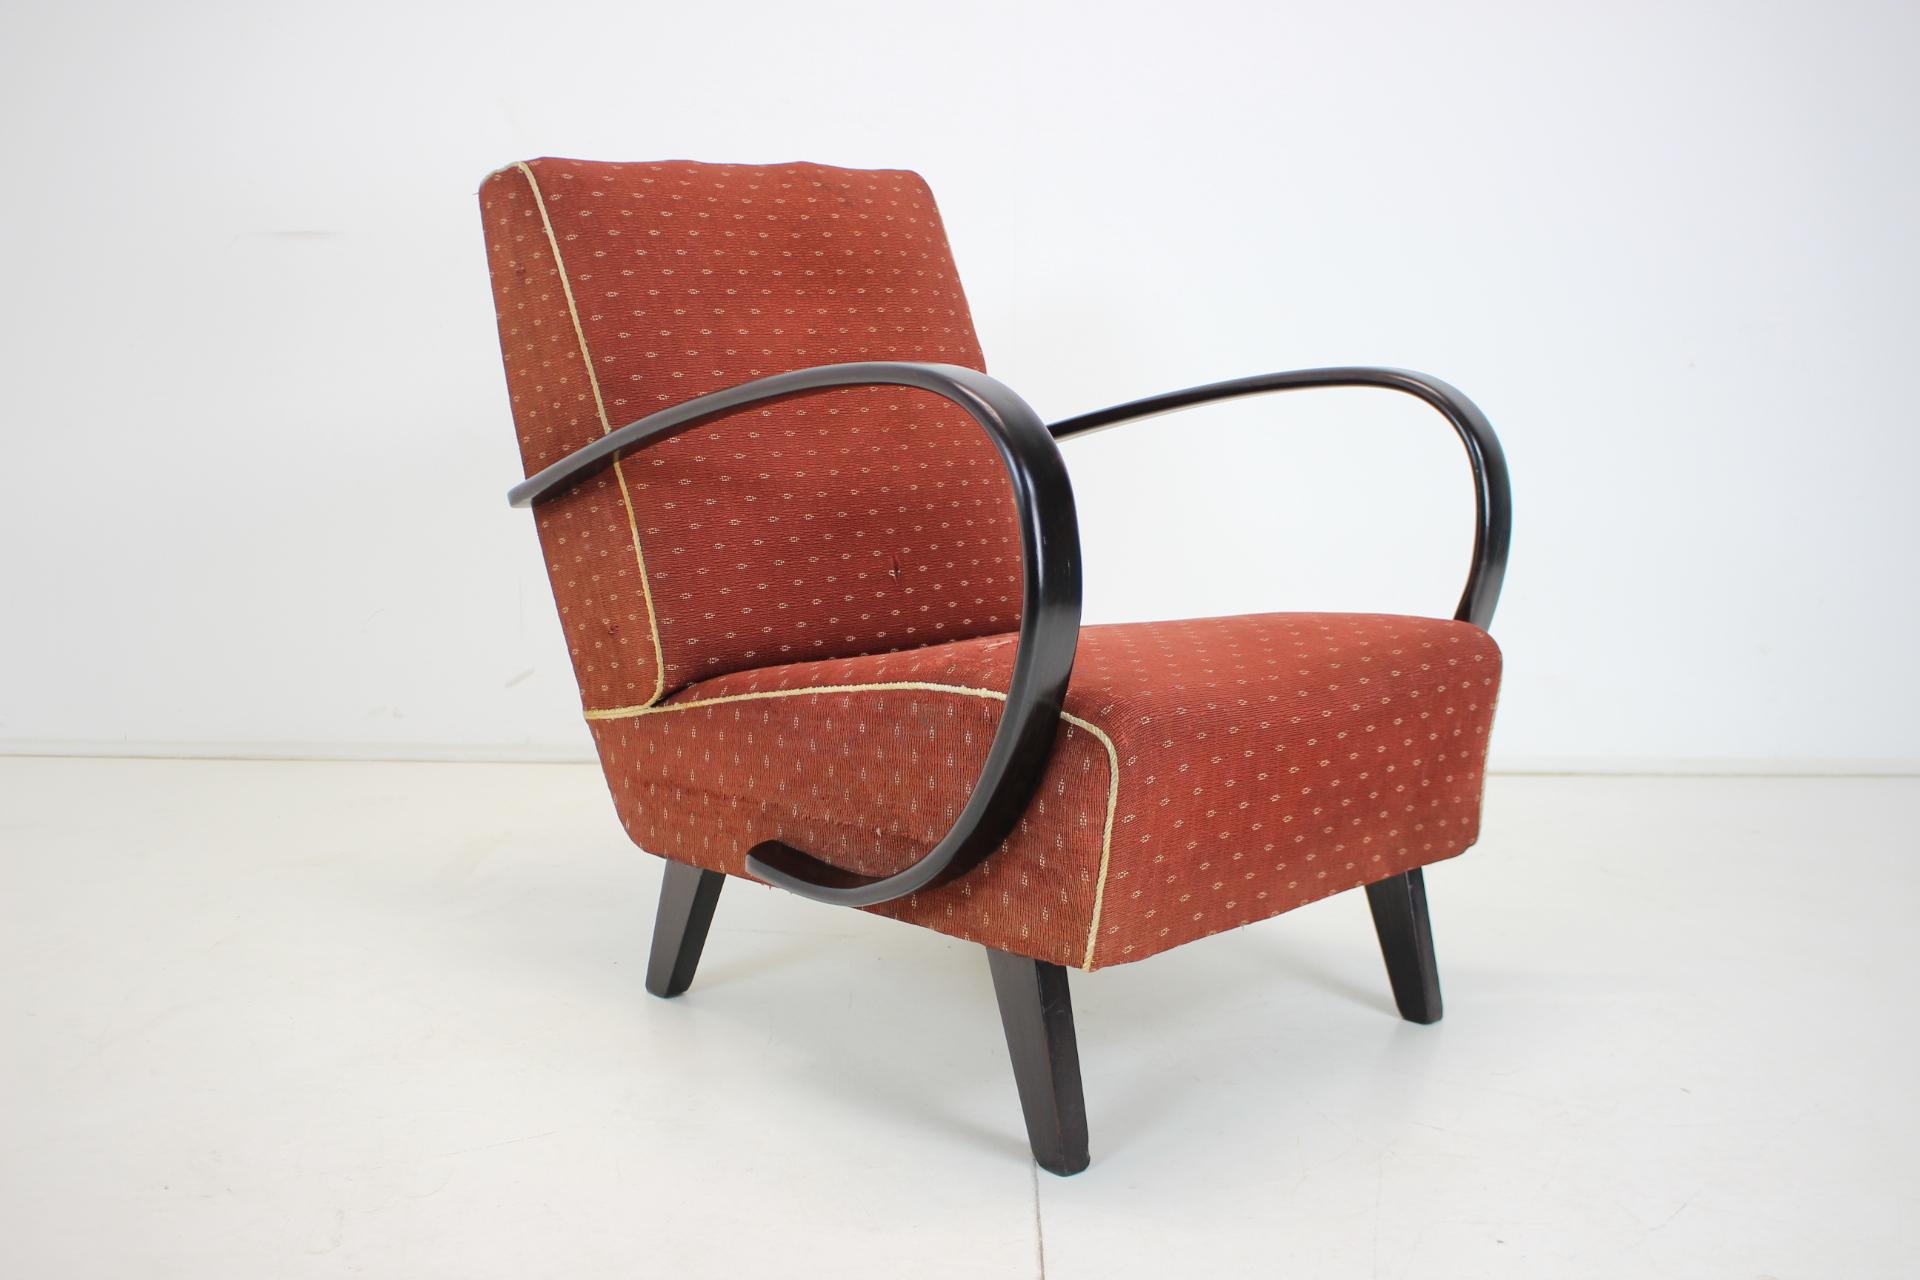 Made in Czechoslovakia
Made of fabric, wood
Upholstery has signs of use 
Suitable for reupholstery
Wooden parts in good condition
Original condition.